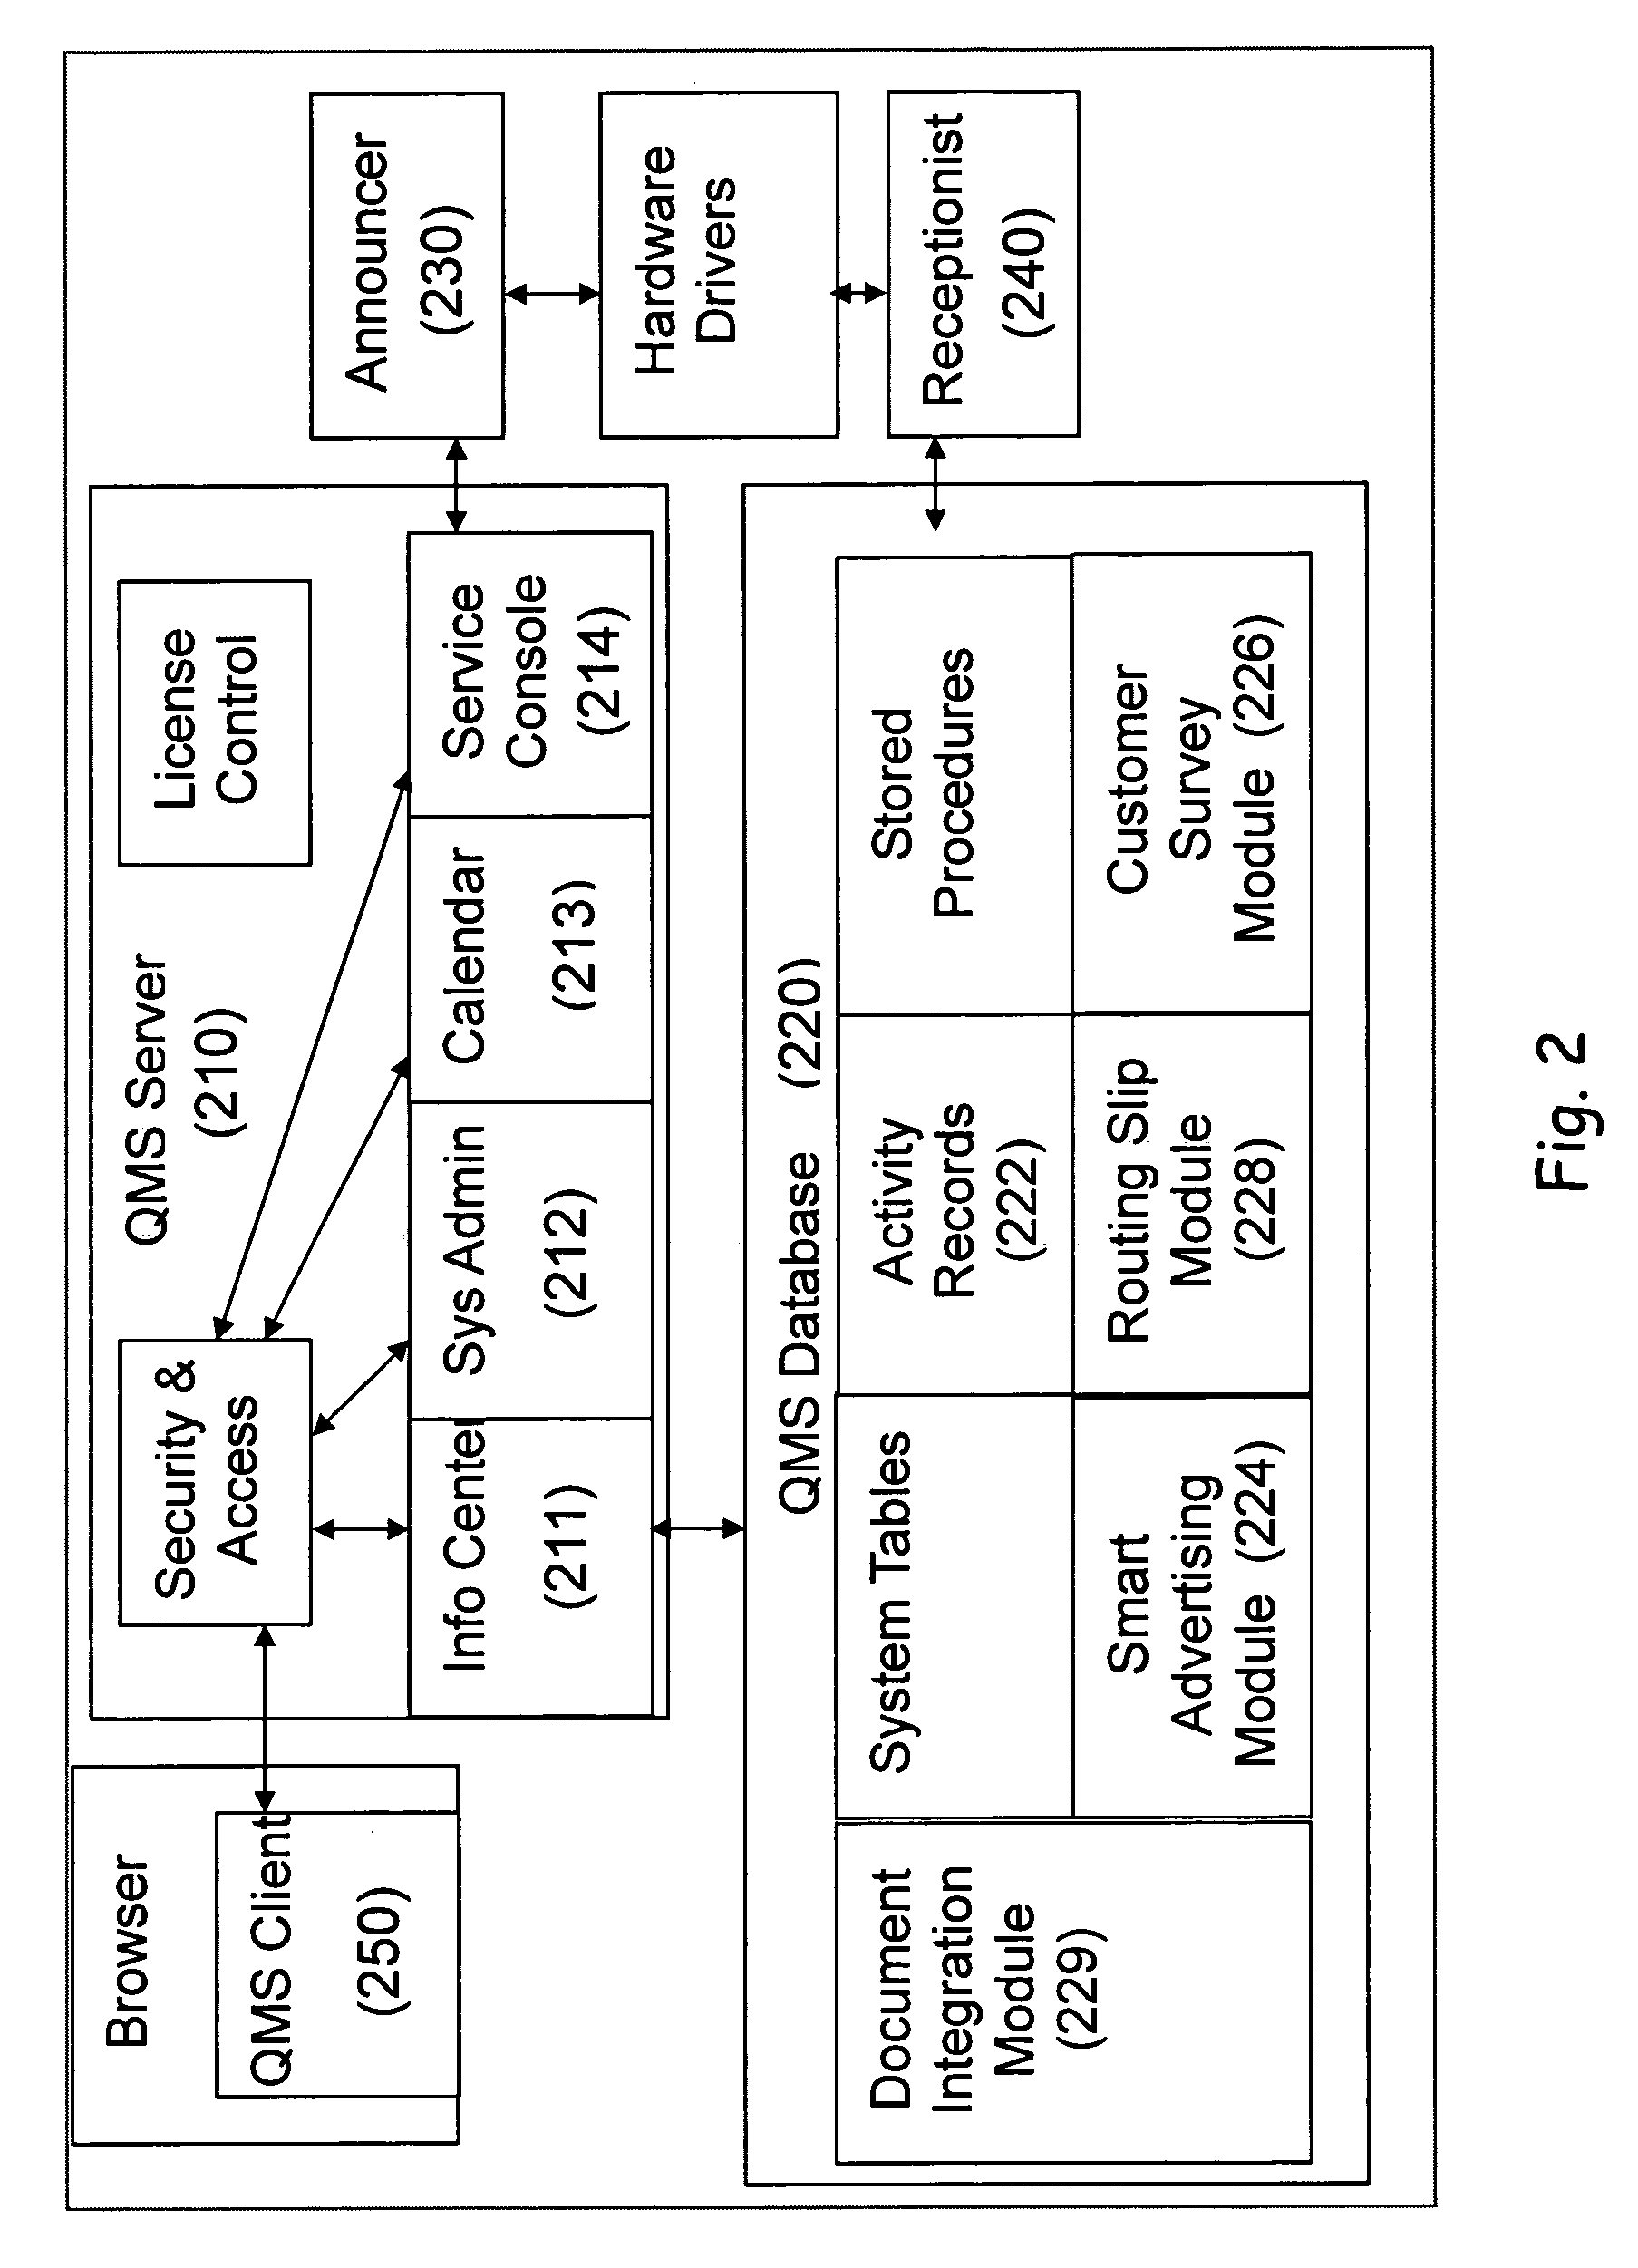 System architecture and method for customer flow management